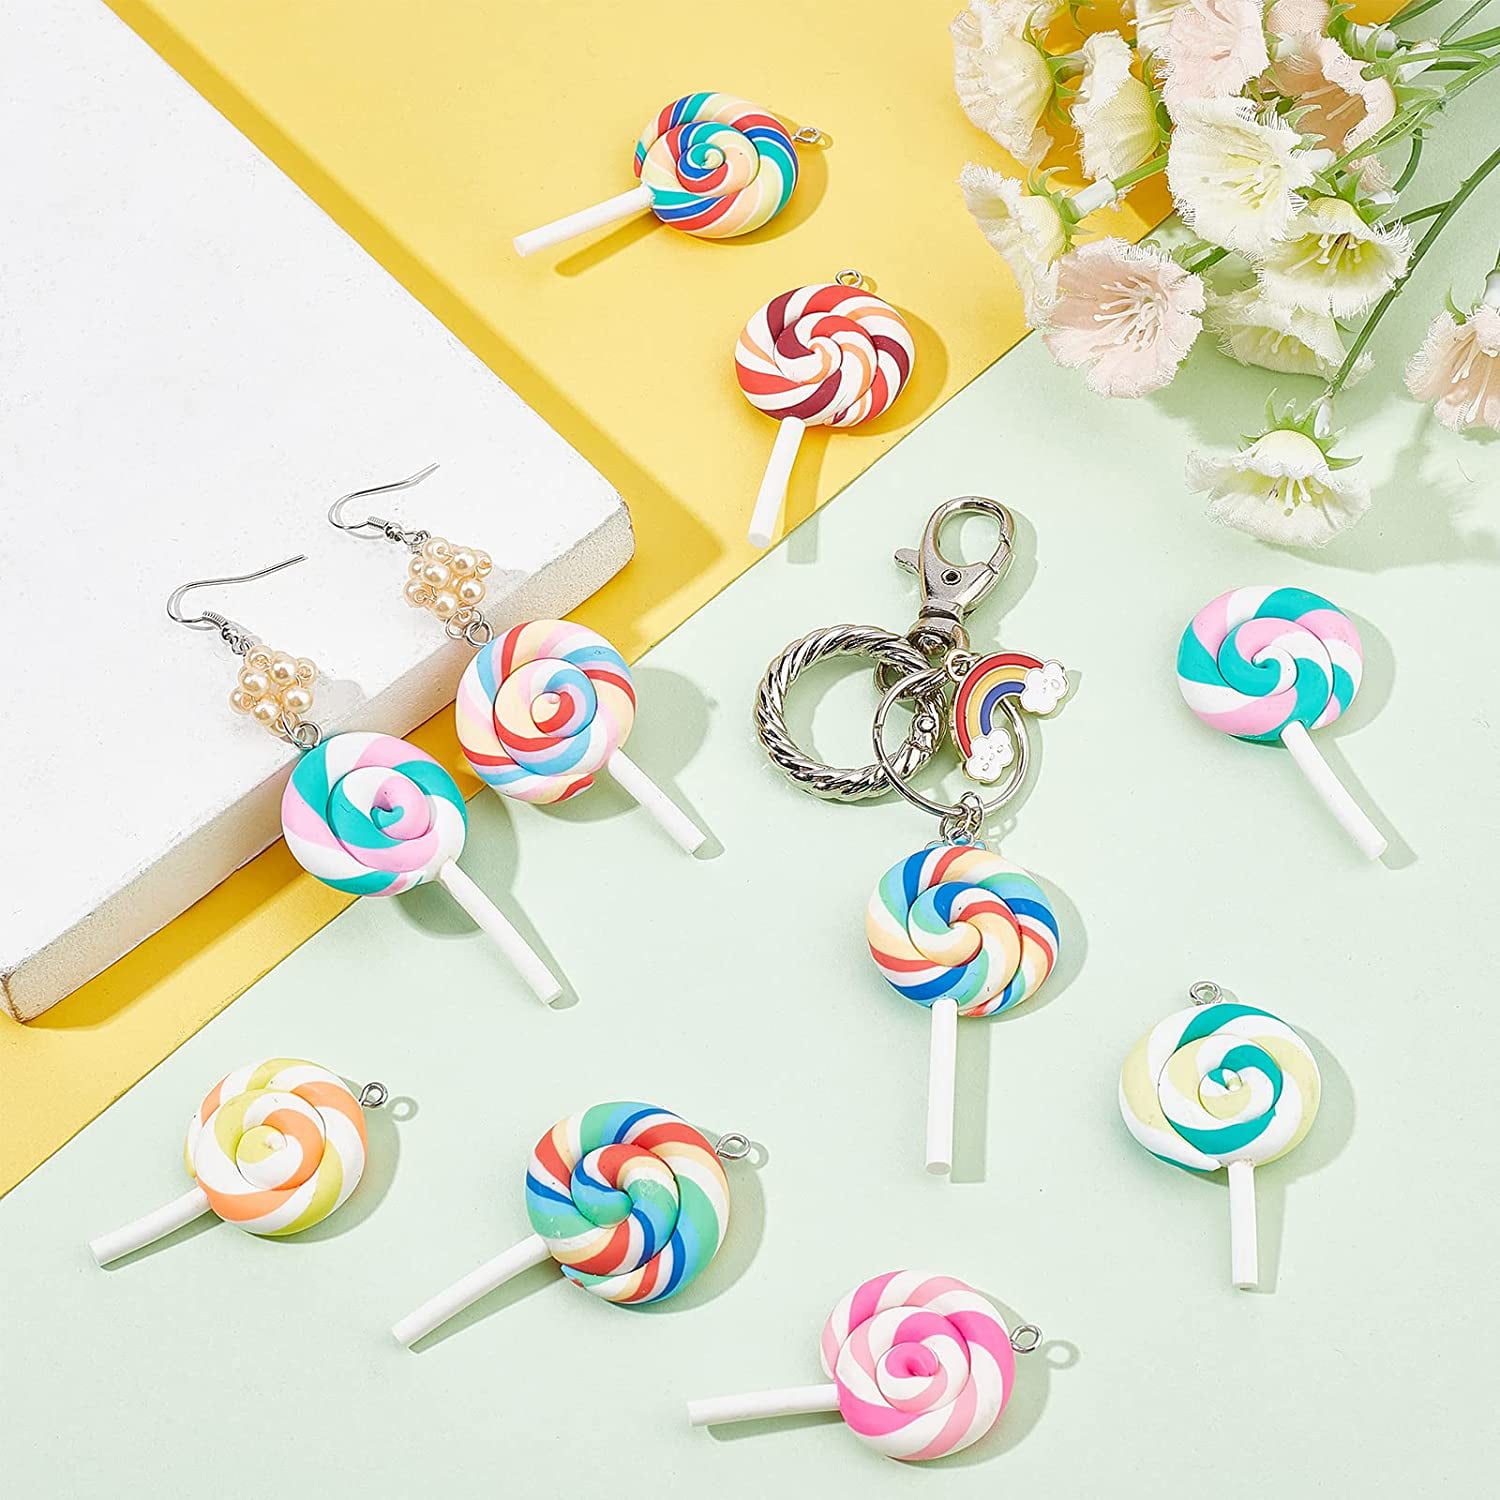 10Pcs Slime Charms Colorful Lollipop Soft Clay Plasticine Slime Accessories  Beads Making Supplies For DIY Scrapbooking Crafts